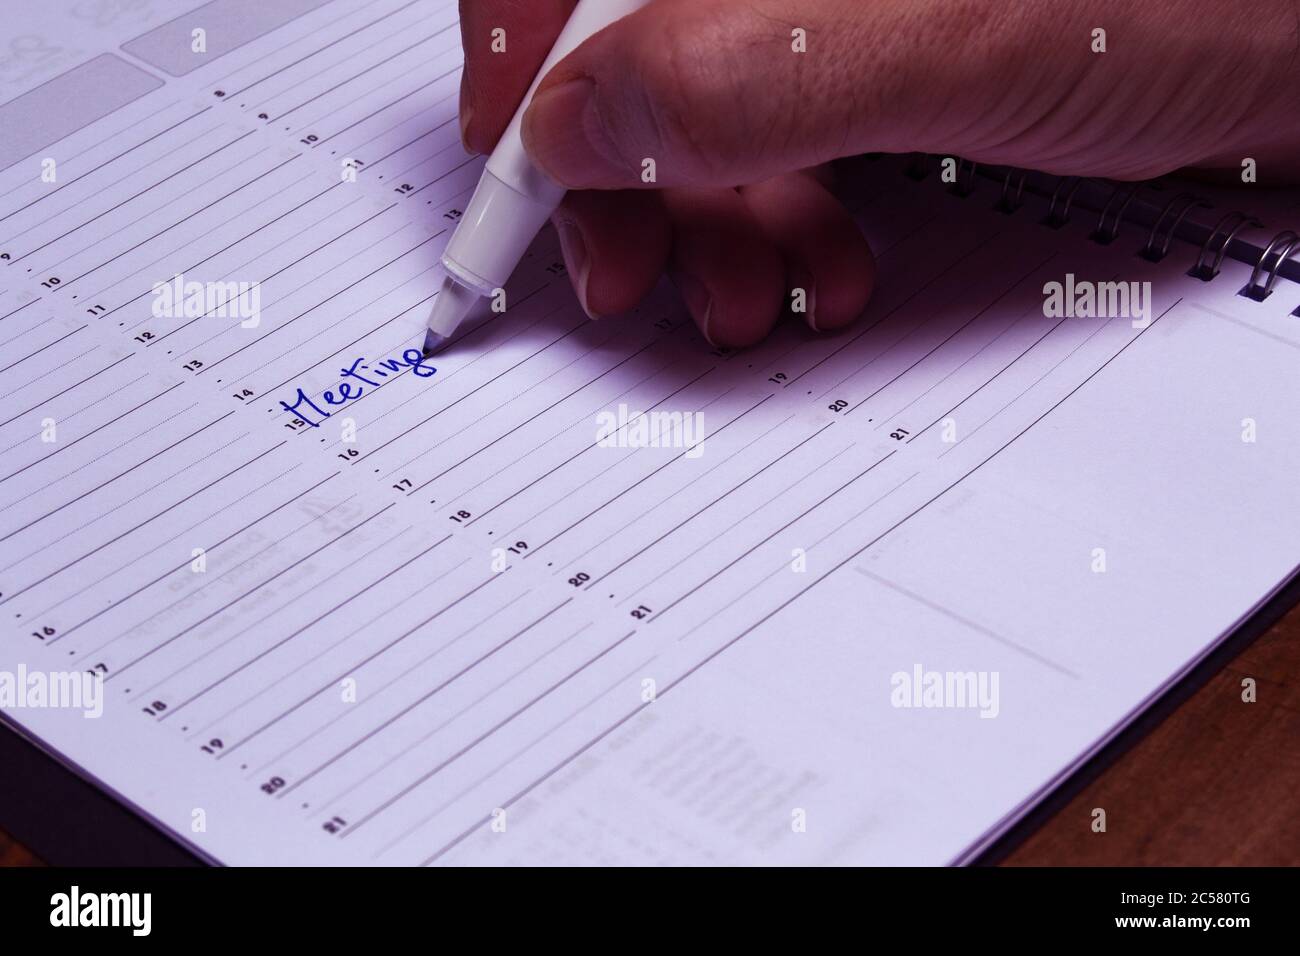 scheduling meeting time on a notepad to fix a business meeting. concept for business, job applications Stock Photo